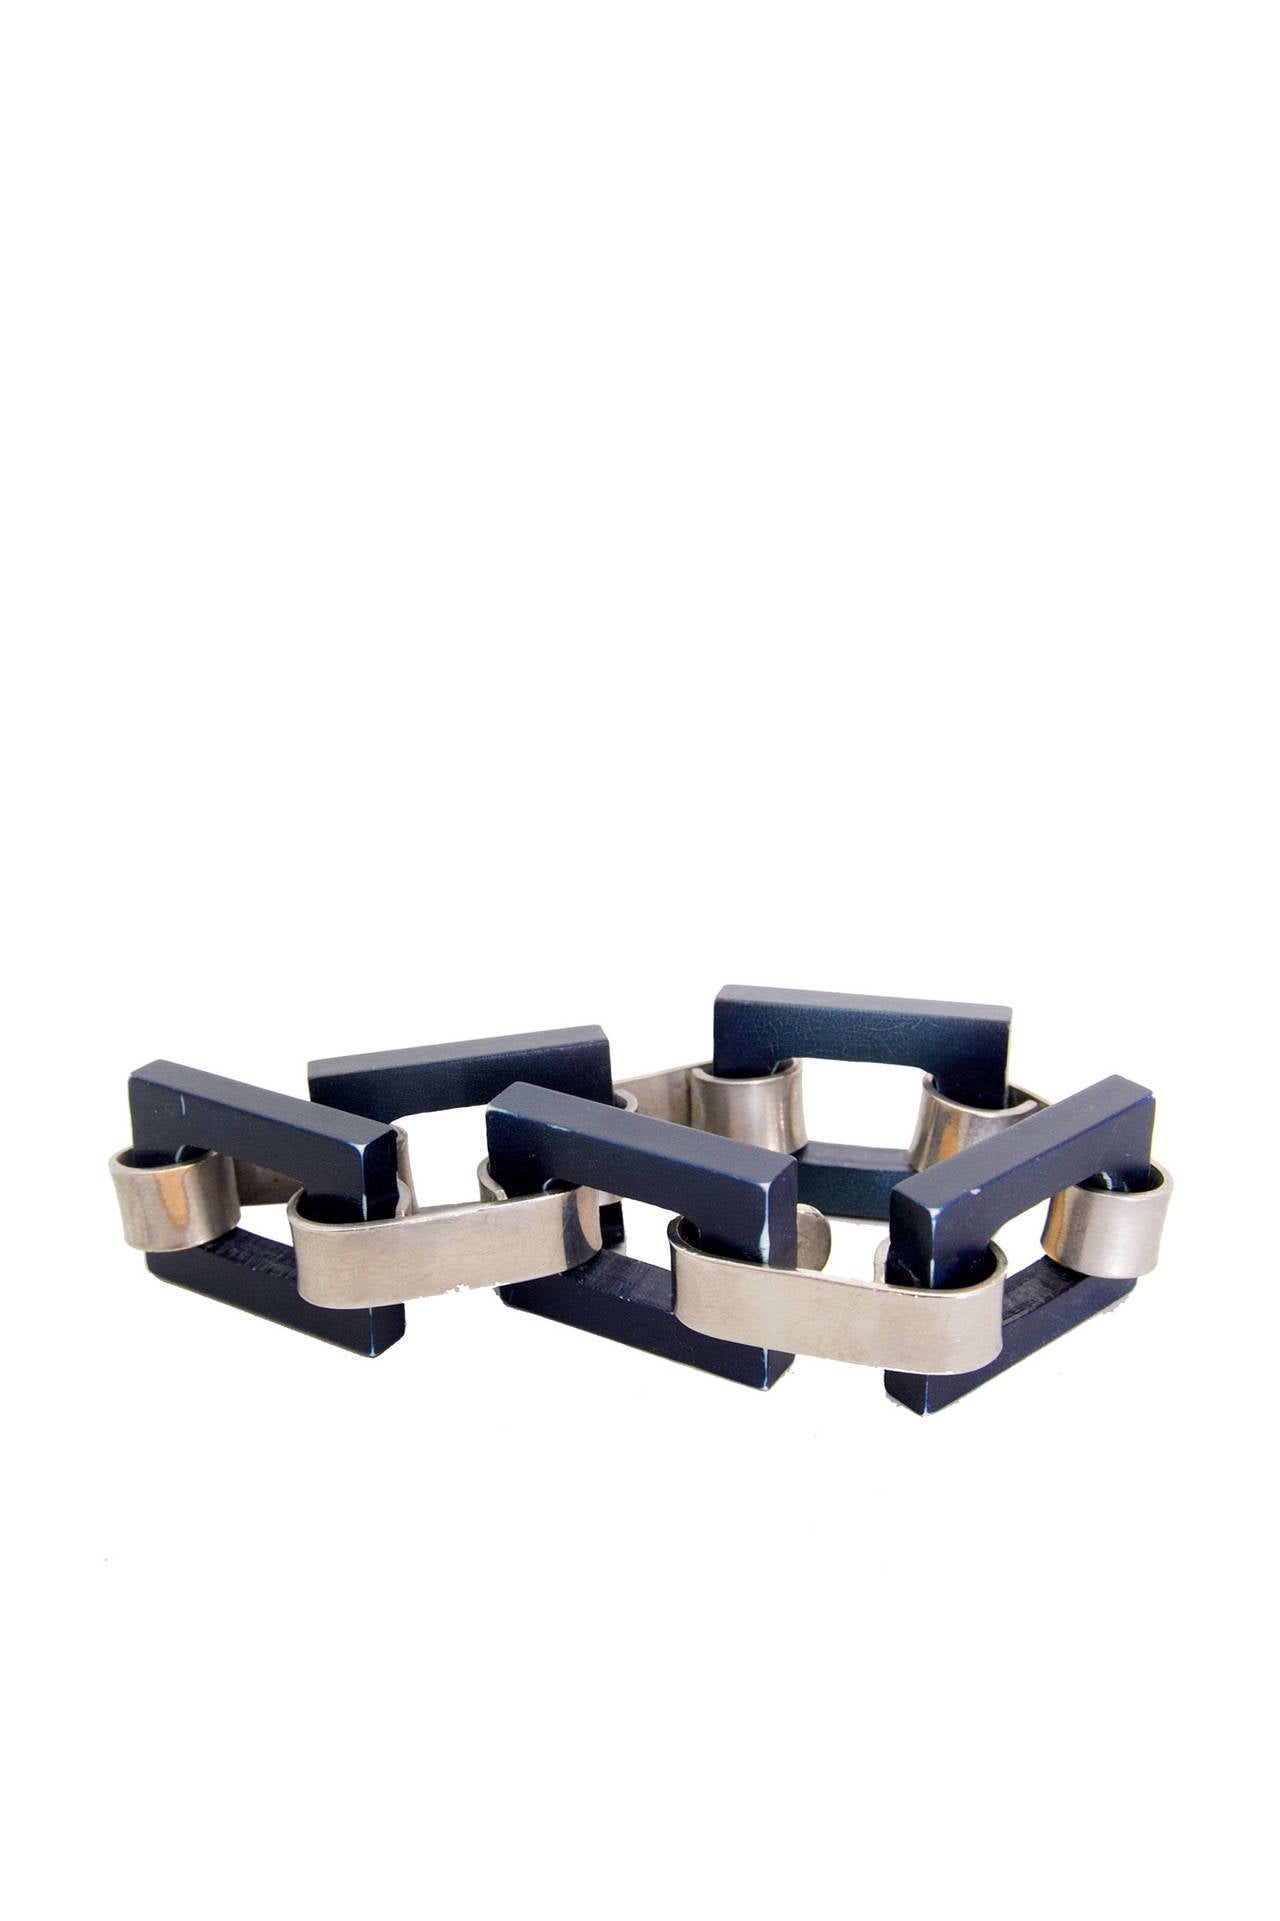 A rare and early 1970s Yves Saint Laurent link bracelet consisting of five navy squared bone and silver coloured metal pieces. 

The bracelet is stamped: YSL